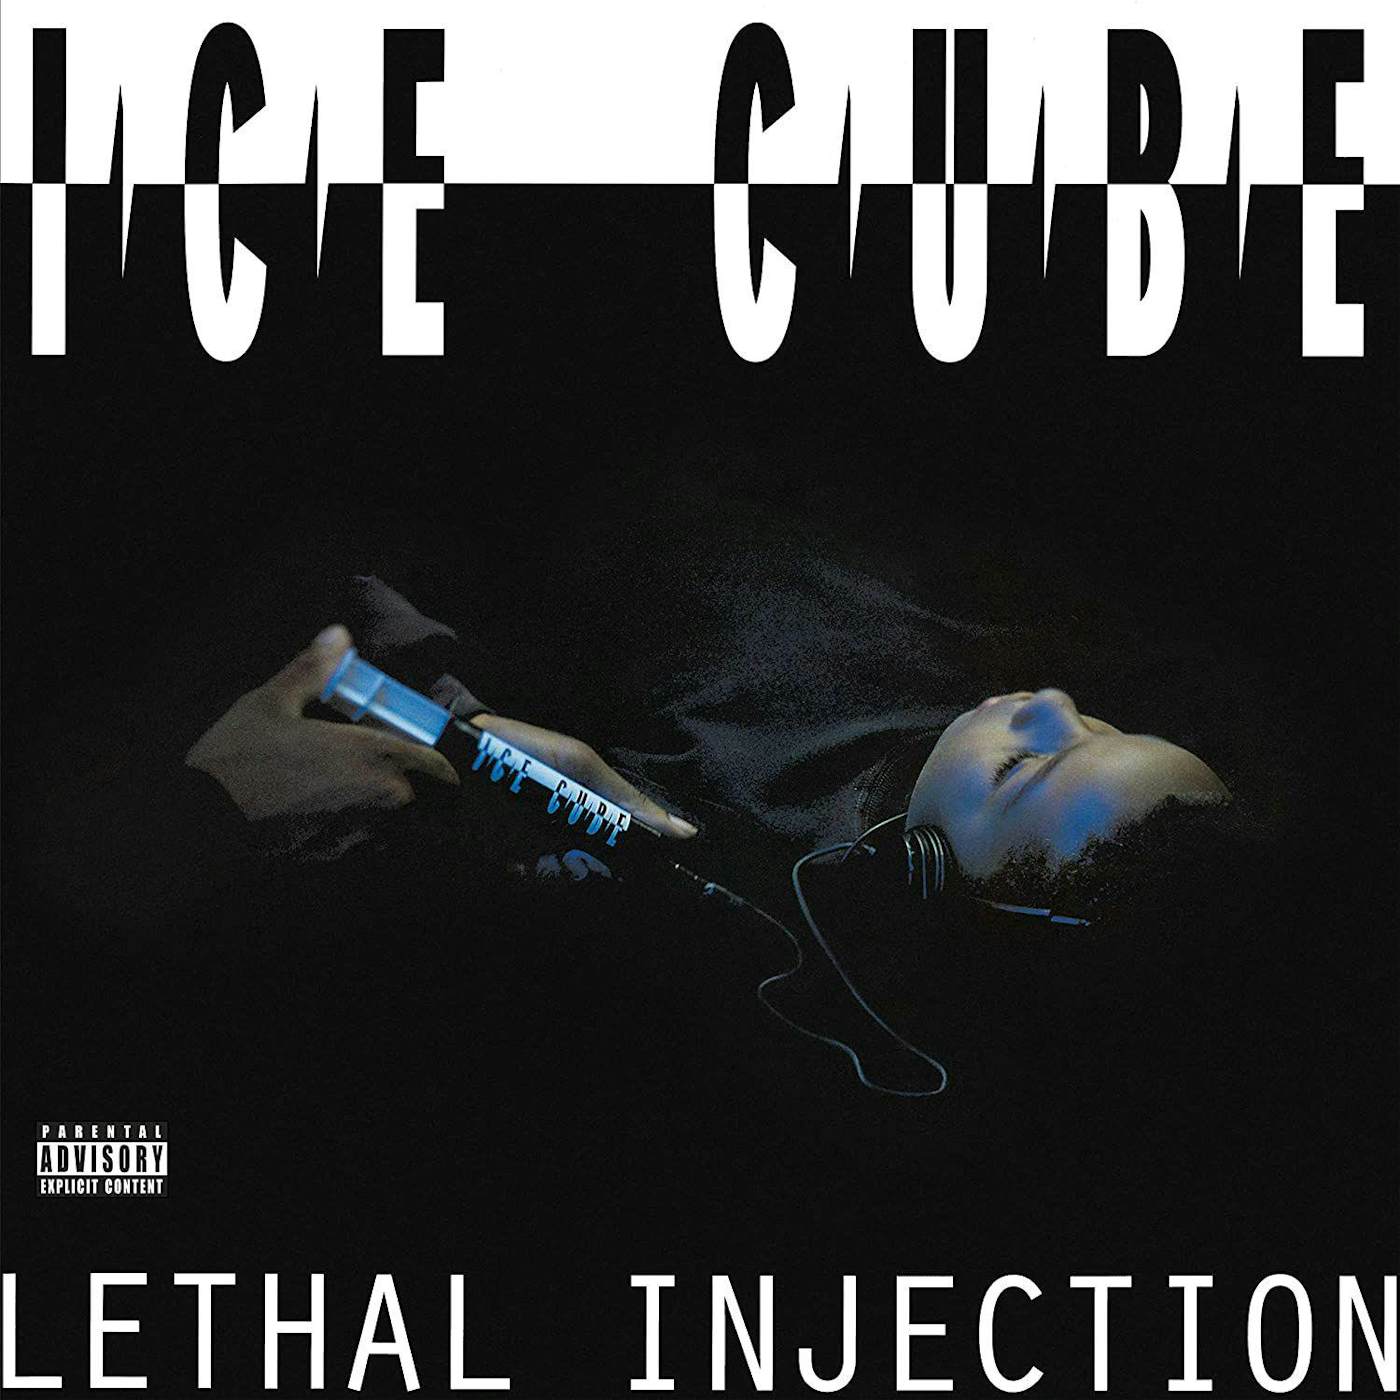 Ice Cube Lethal Injection Vinyl Record